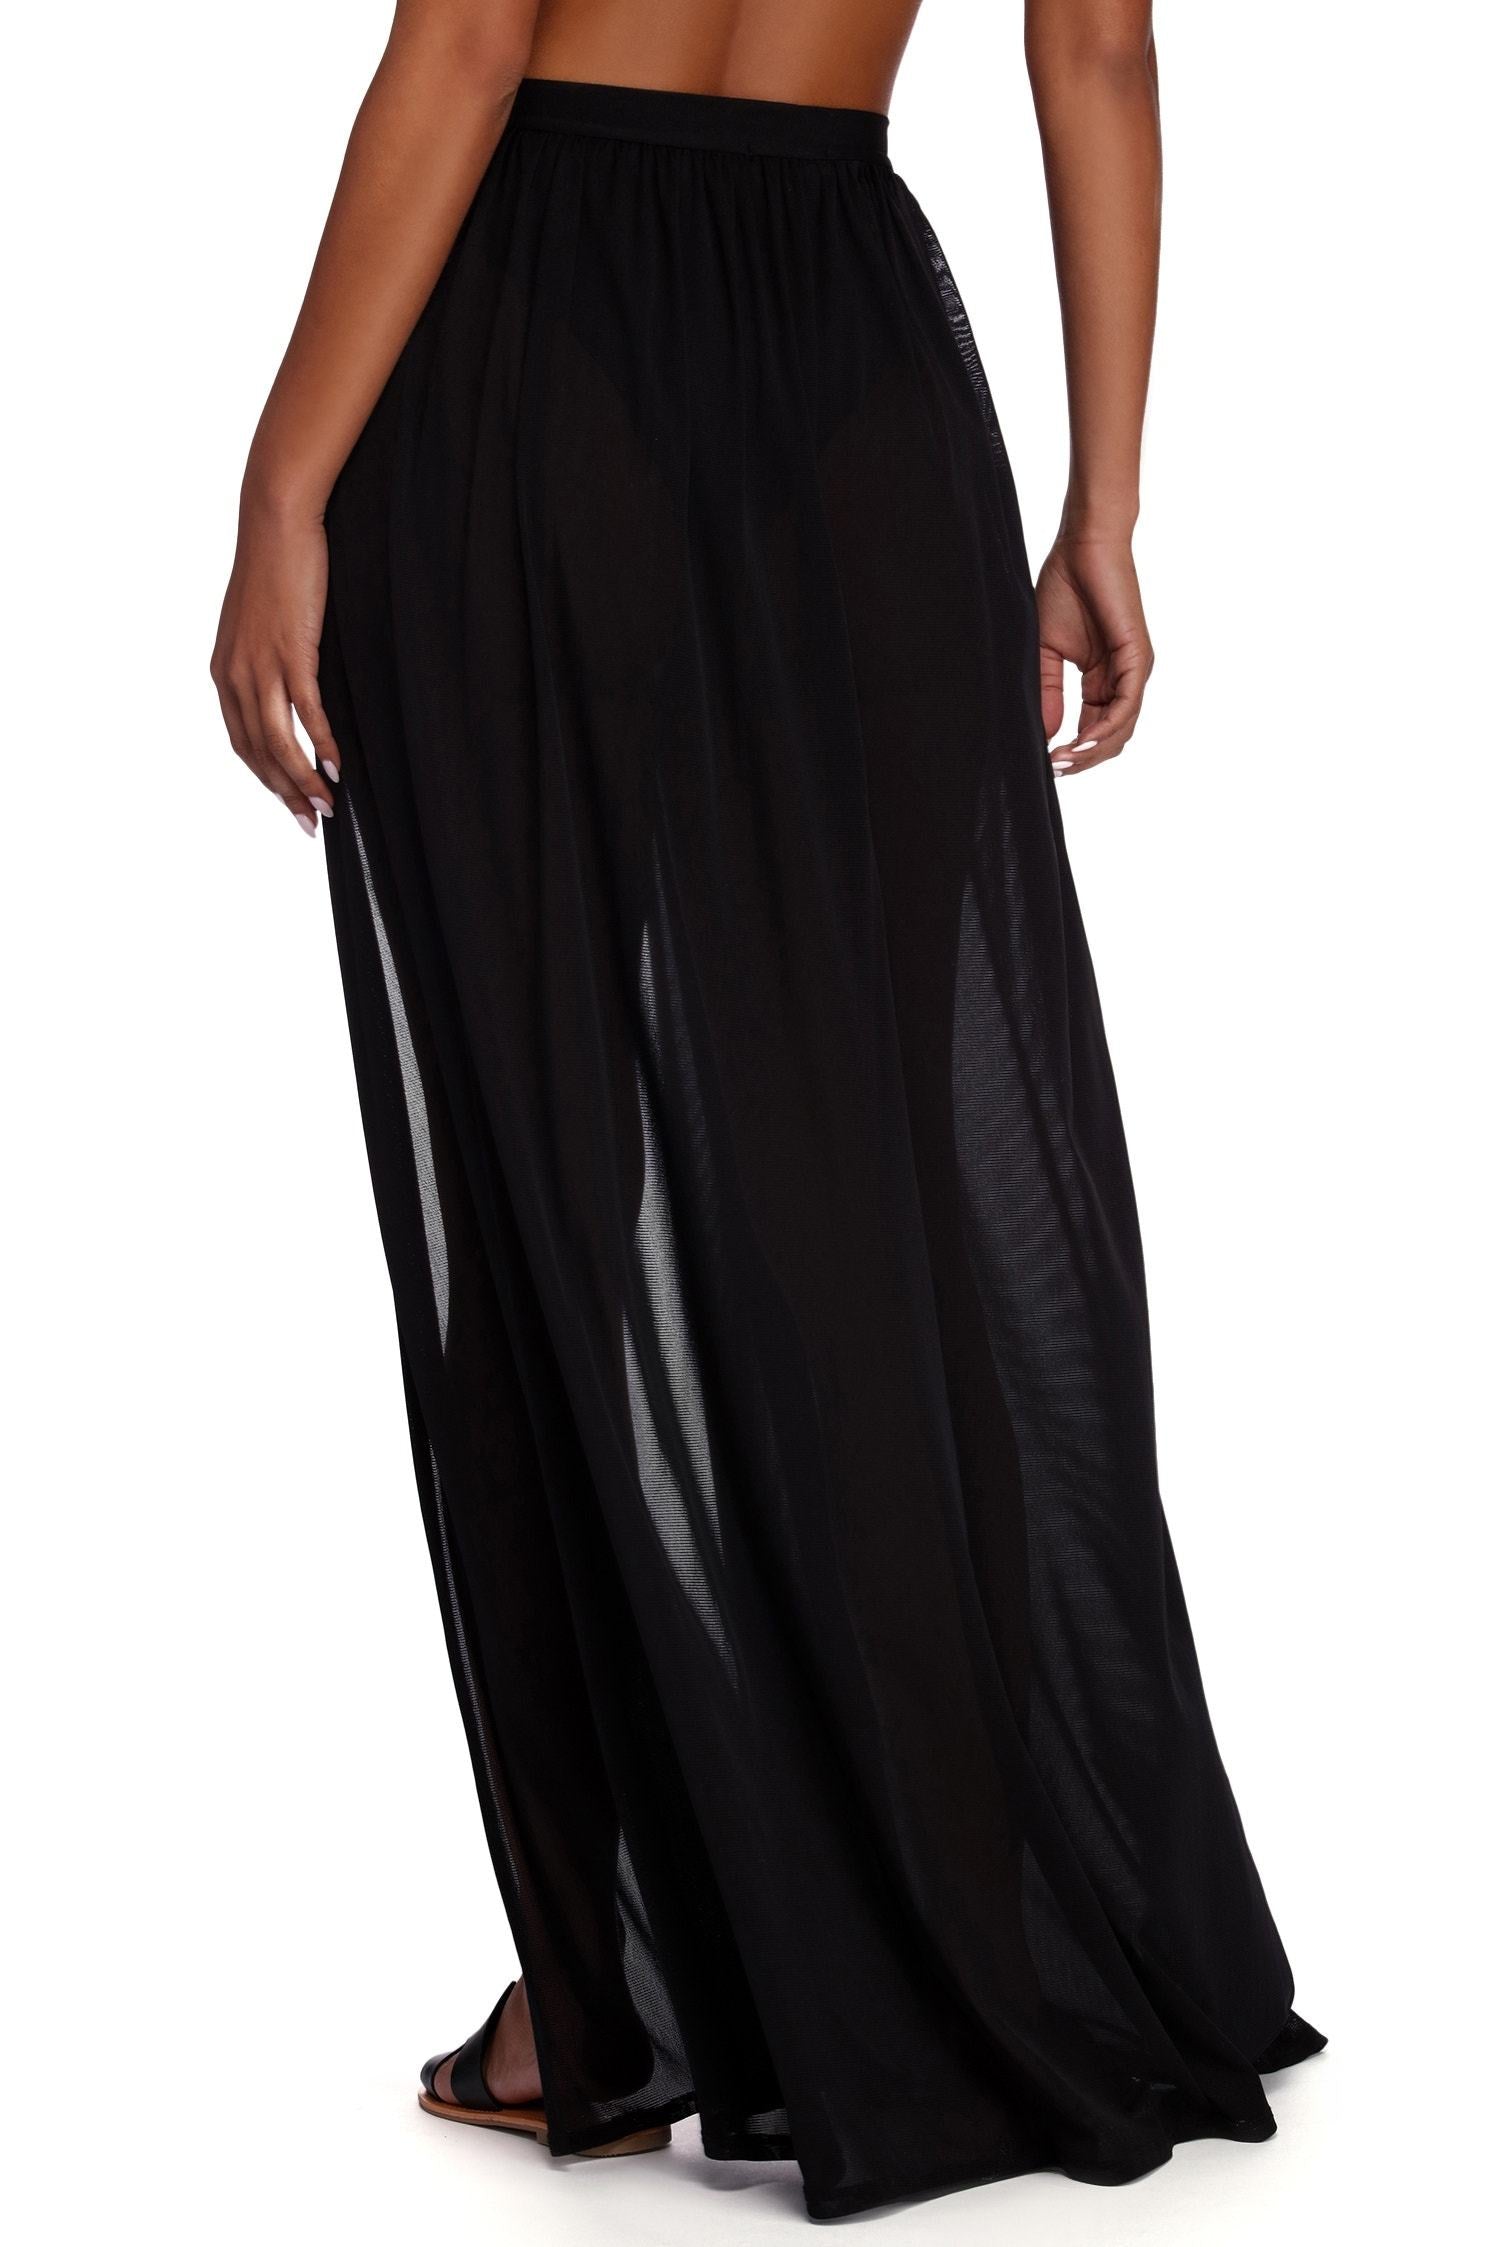 Tie Waist Mesh Maxi Skirt - Lady Occasions